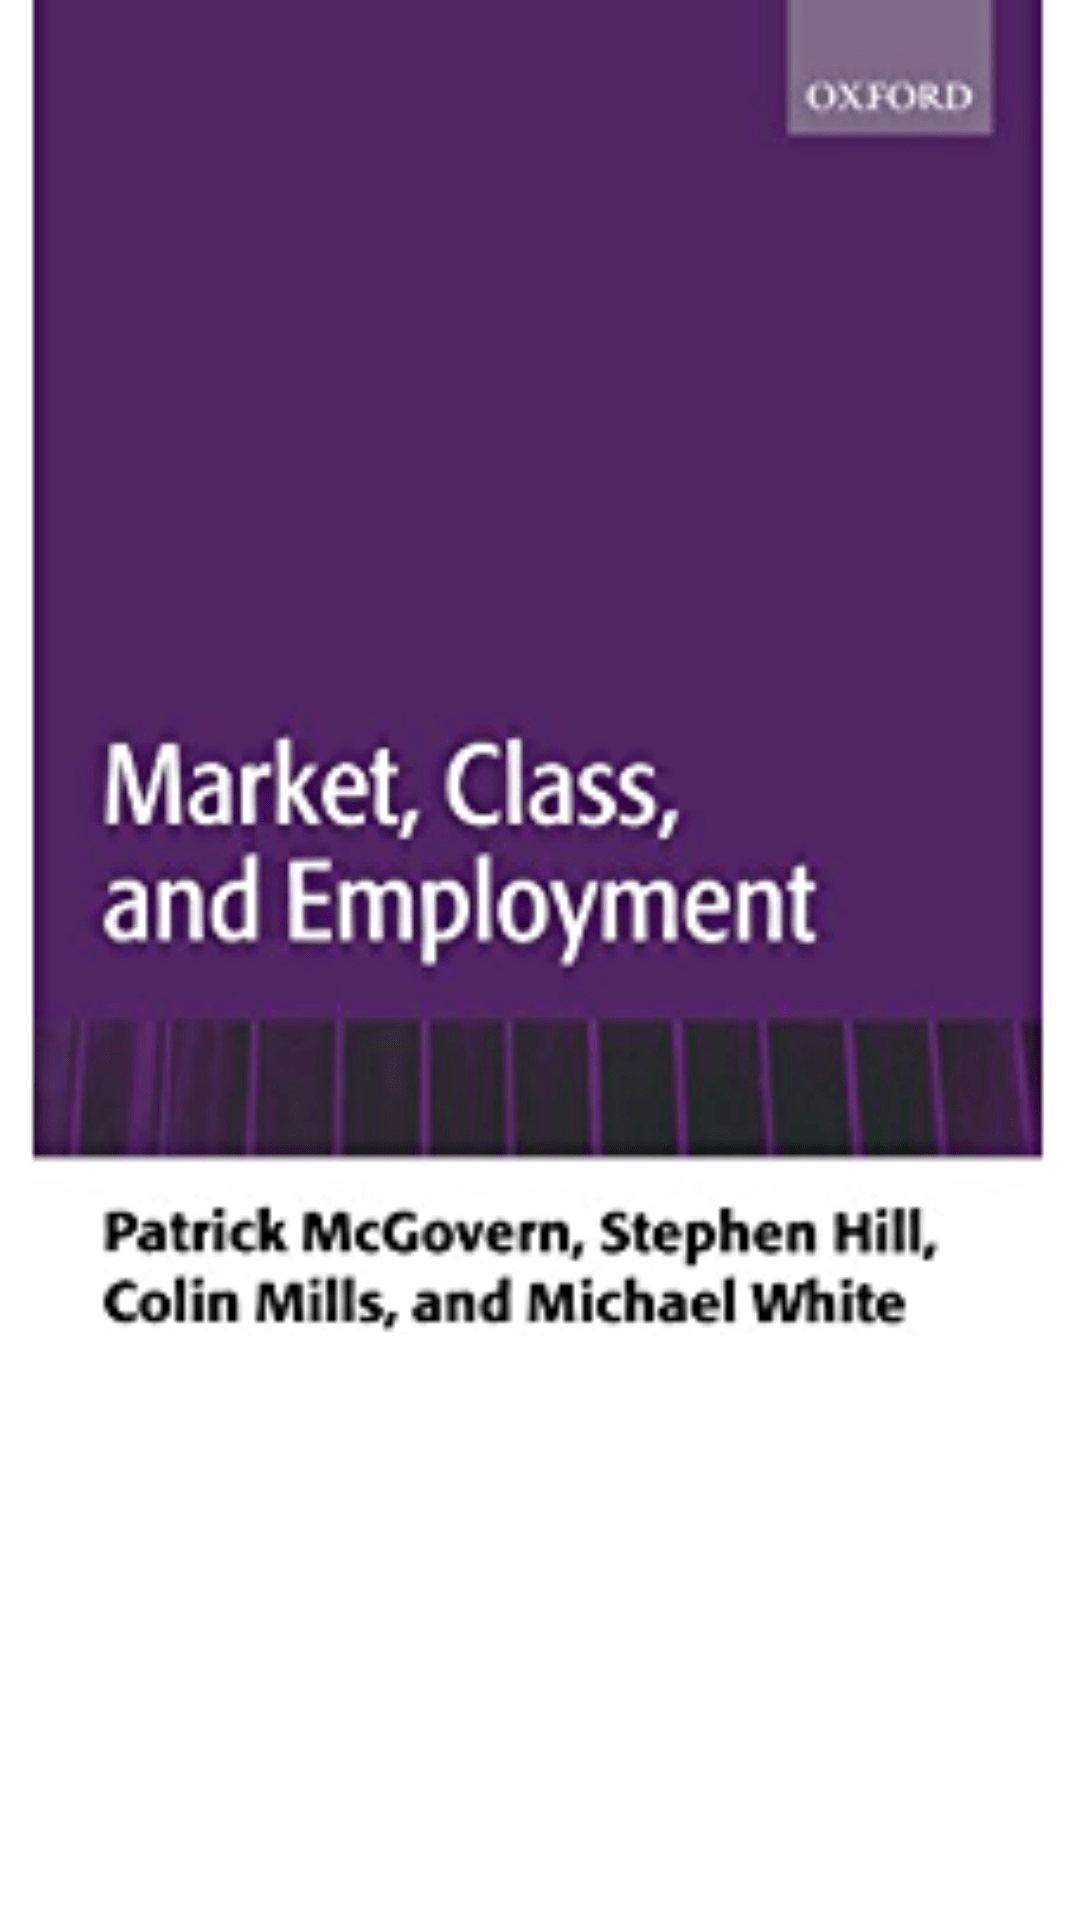 Market, Class, and Employment by Patrick McGovern